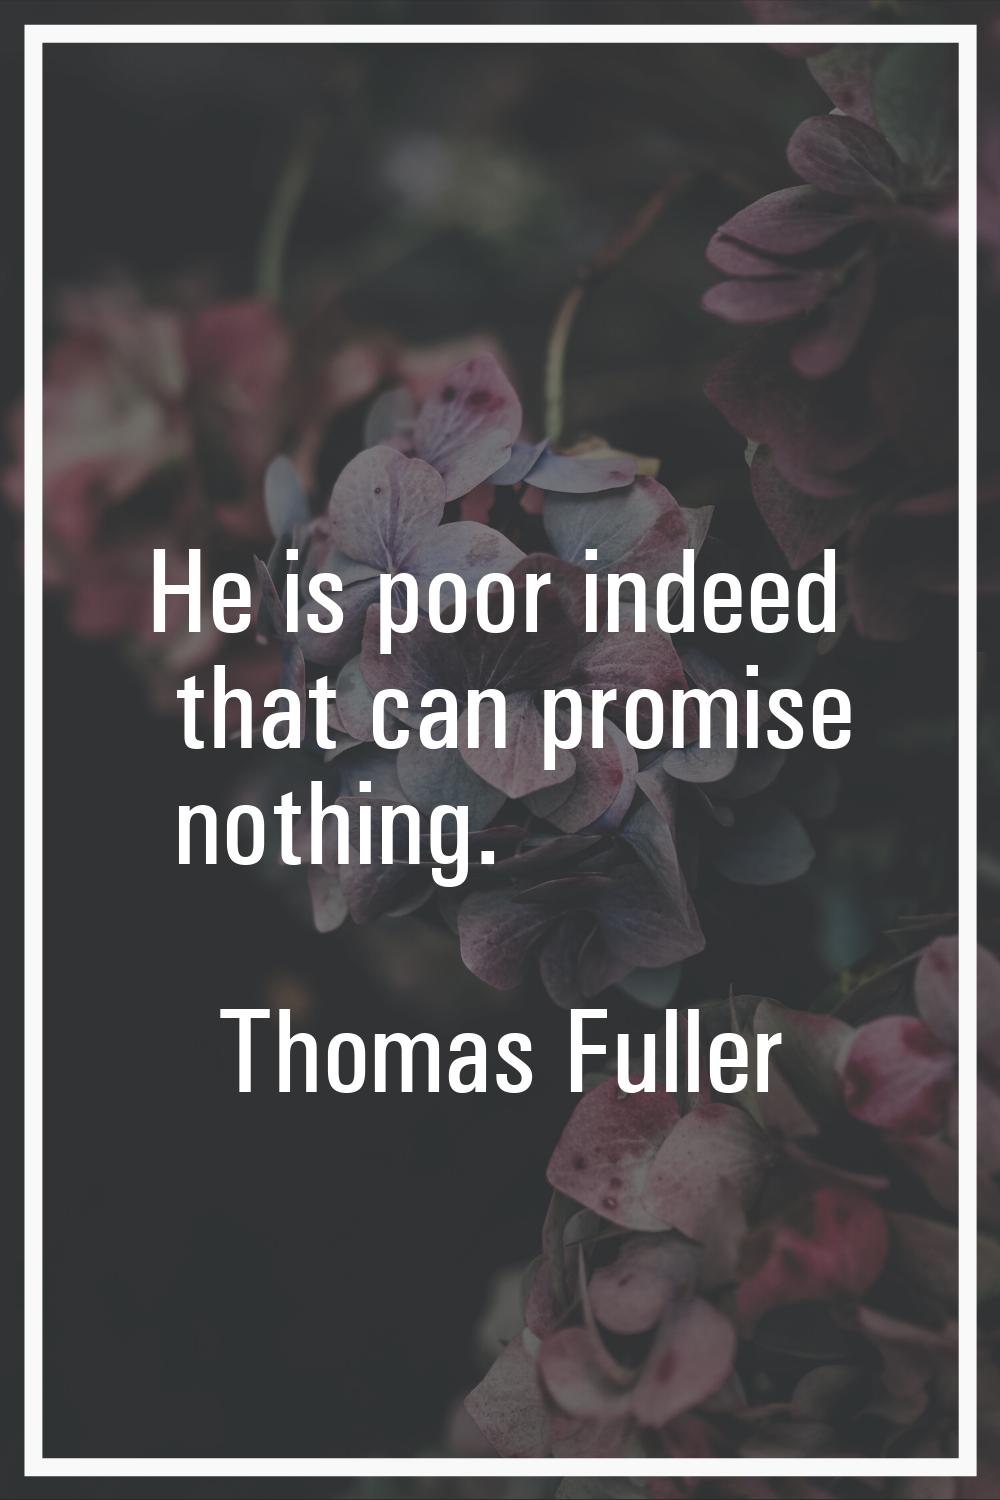 He is poor indeed that can promise nothing.